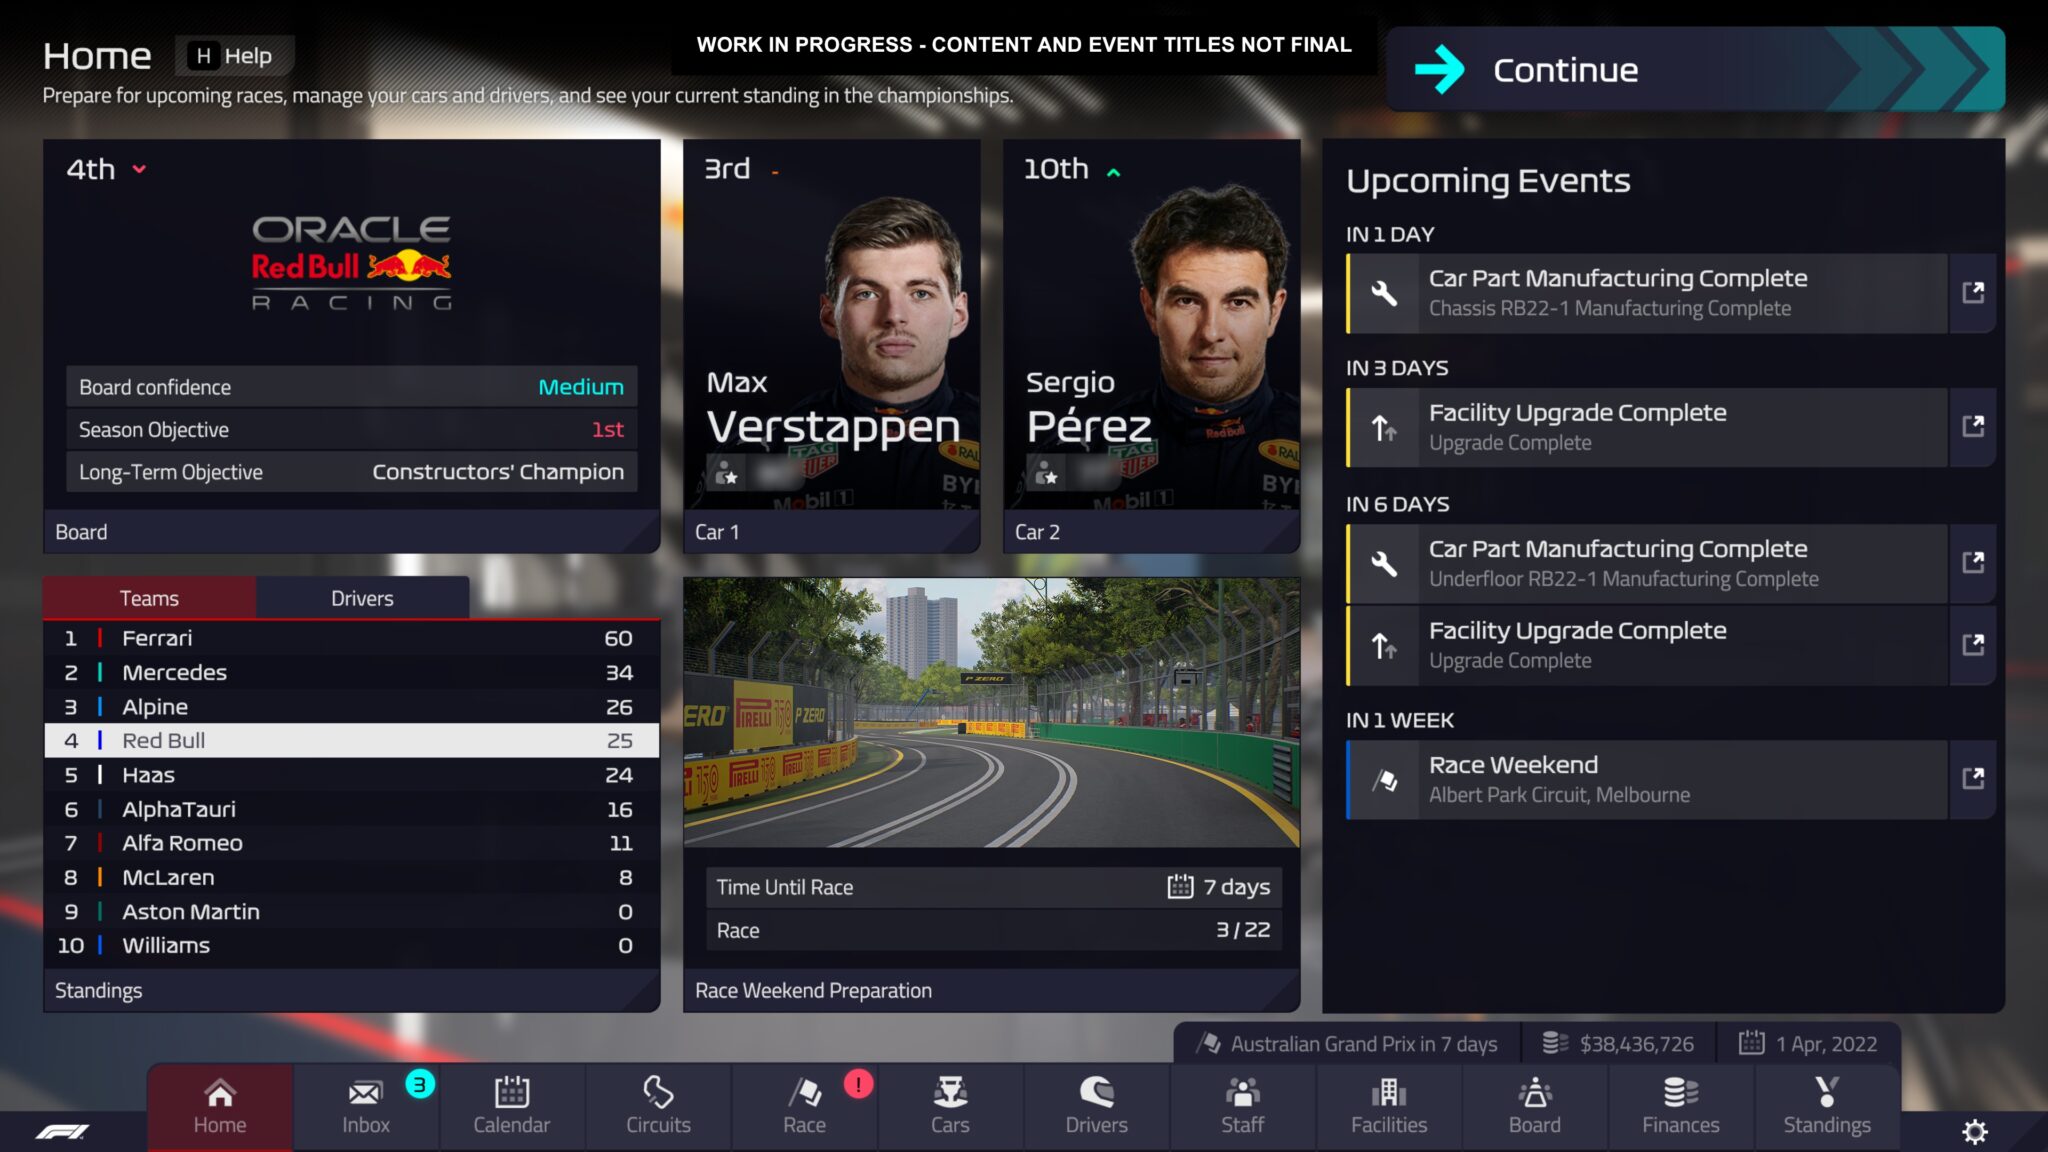 F1 Manager 2022 offers a well-structured interface with an authentic Formula 1 look.